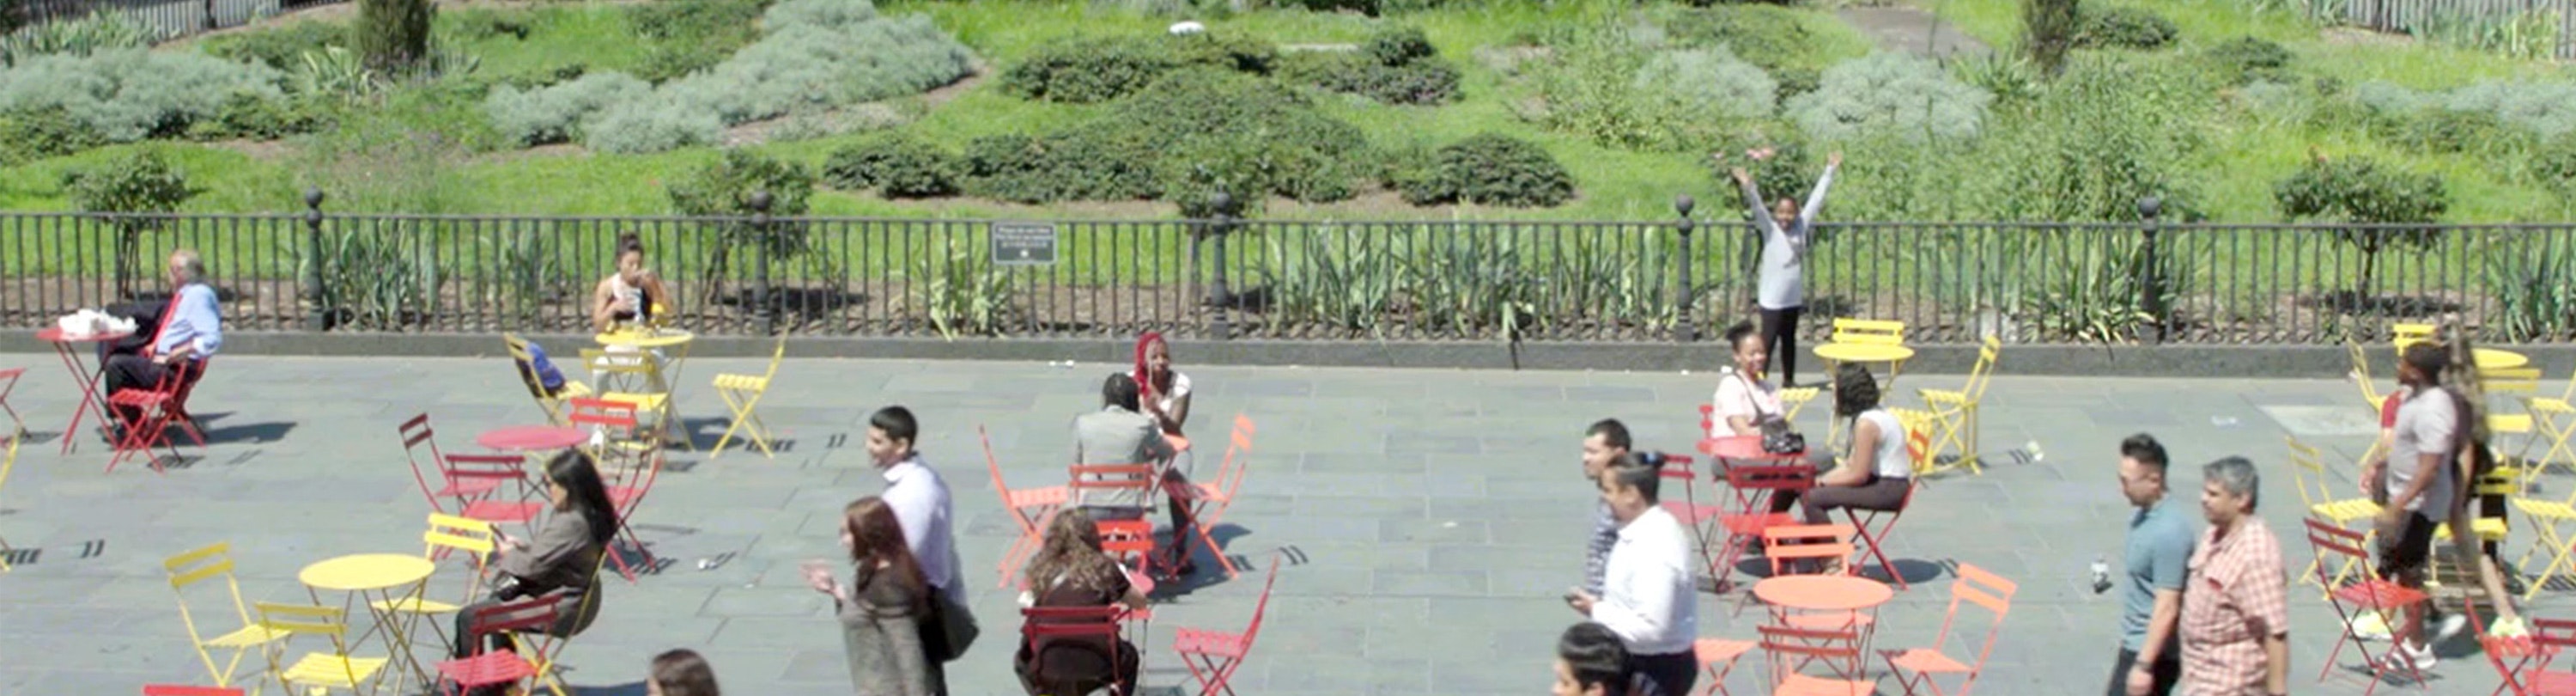 People are sitting on small colourful tables and chairs outside in a public space with a green park in the background